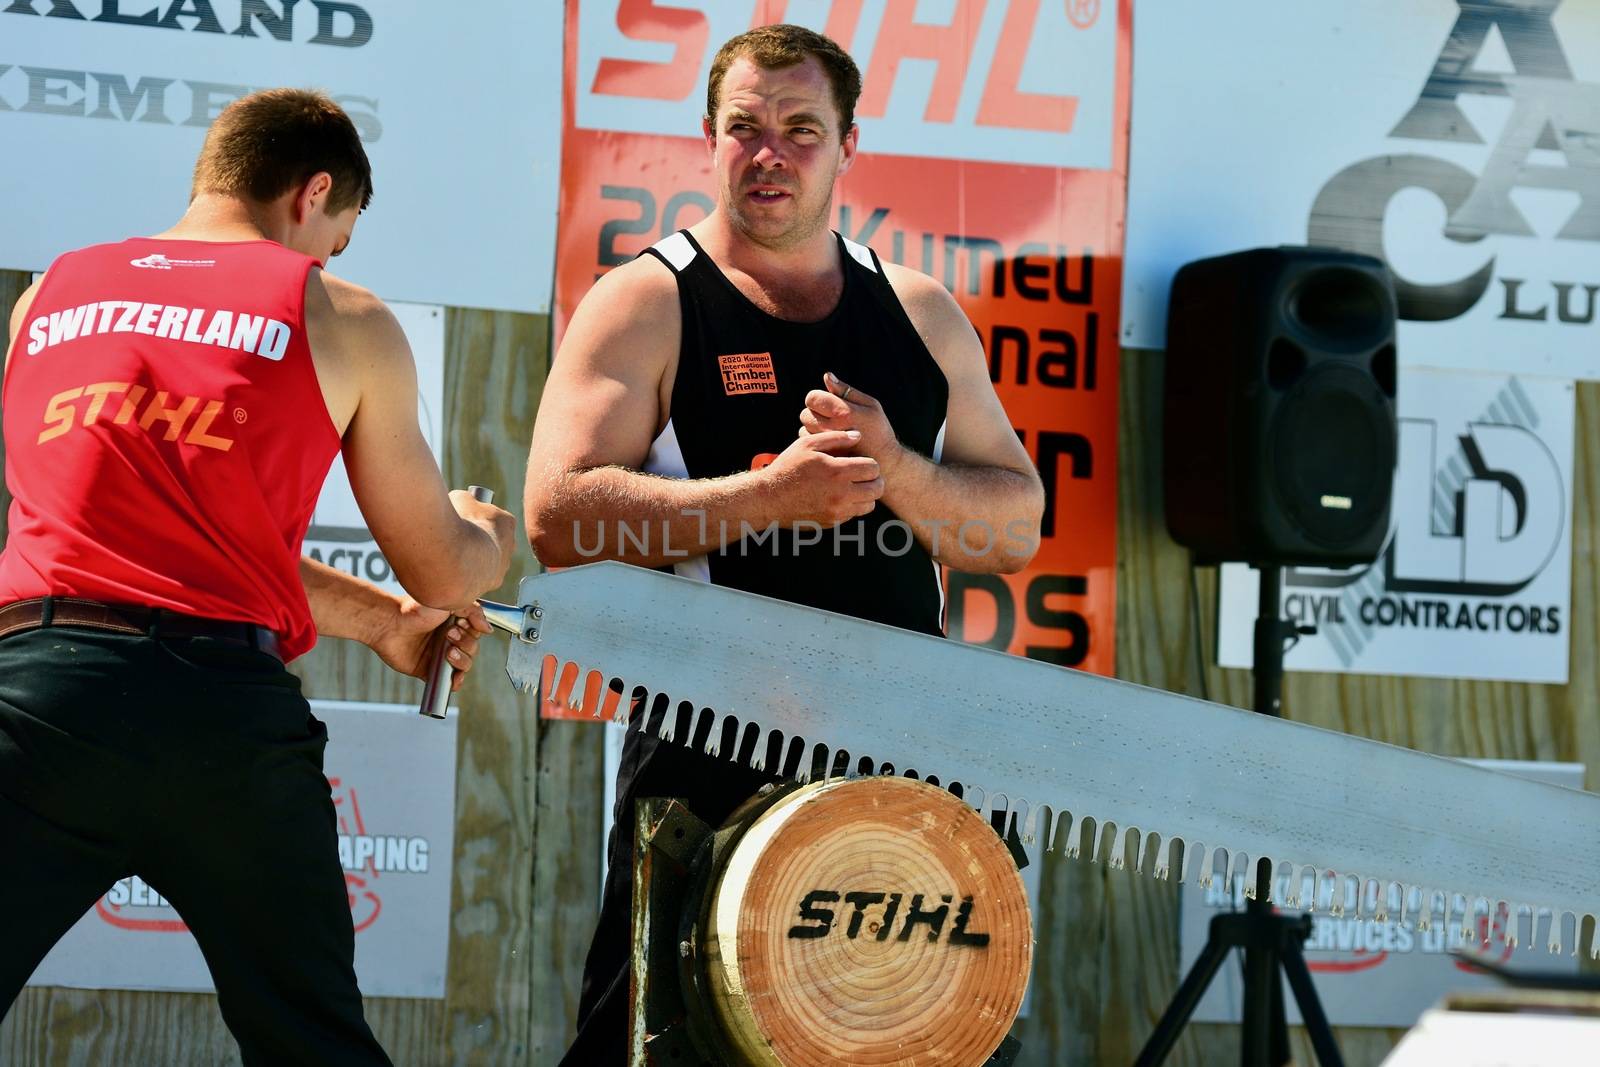 Kumeu, New Zealand - Mar 2020. 98th Annual Kumeu Show, International Timber Sports (the world Champion Axemen). Competition among renowned world axemen who came to New Zealand specifically for this event. by Marshalkina